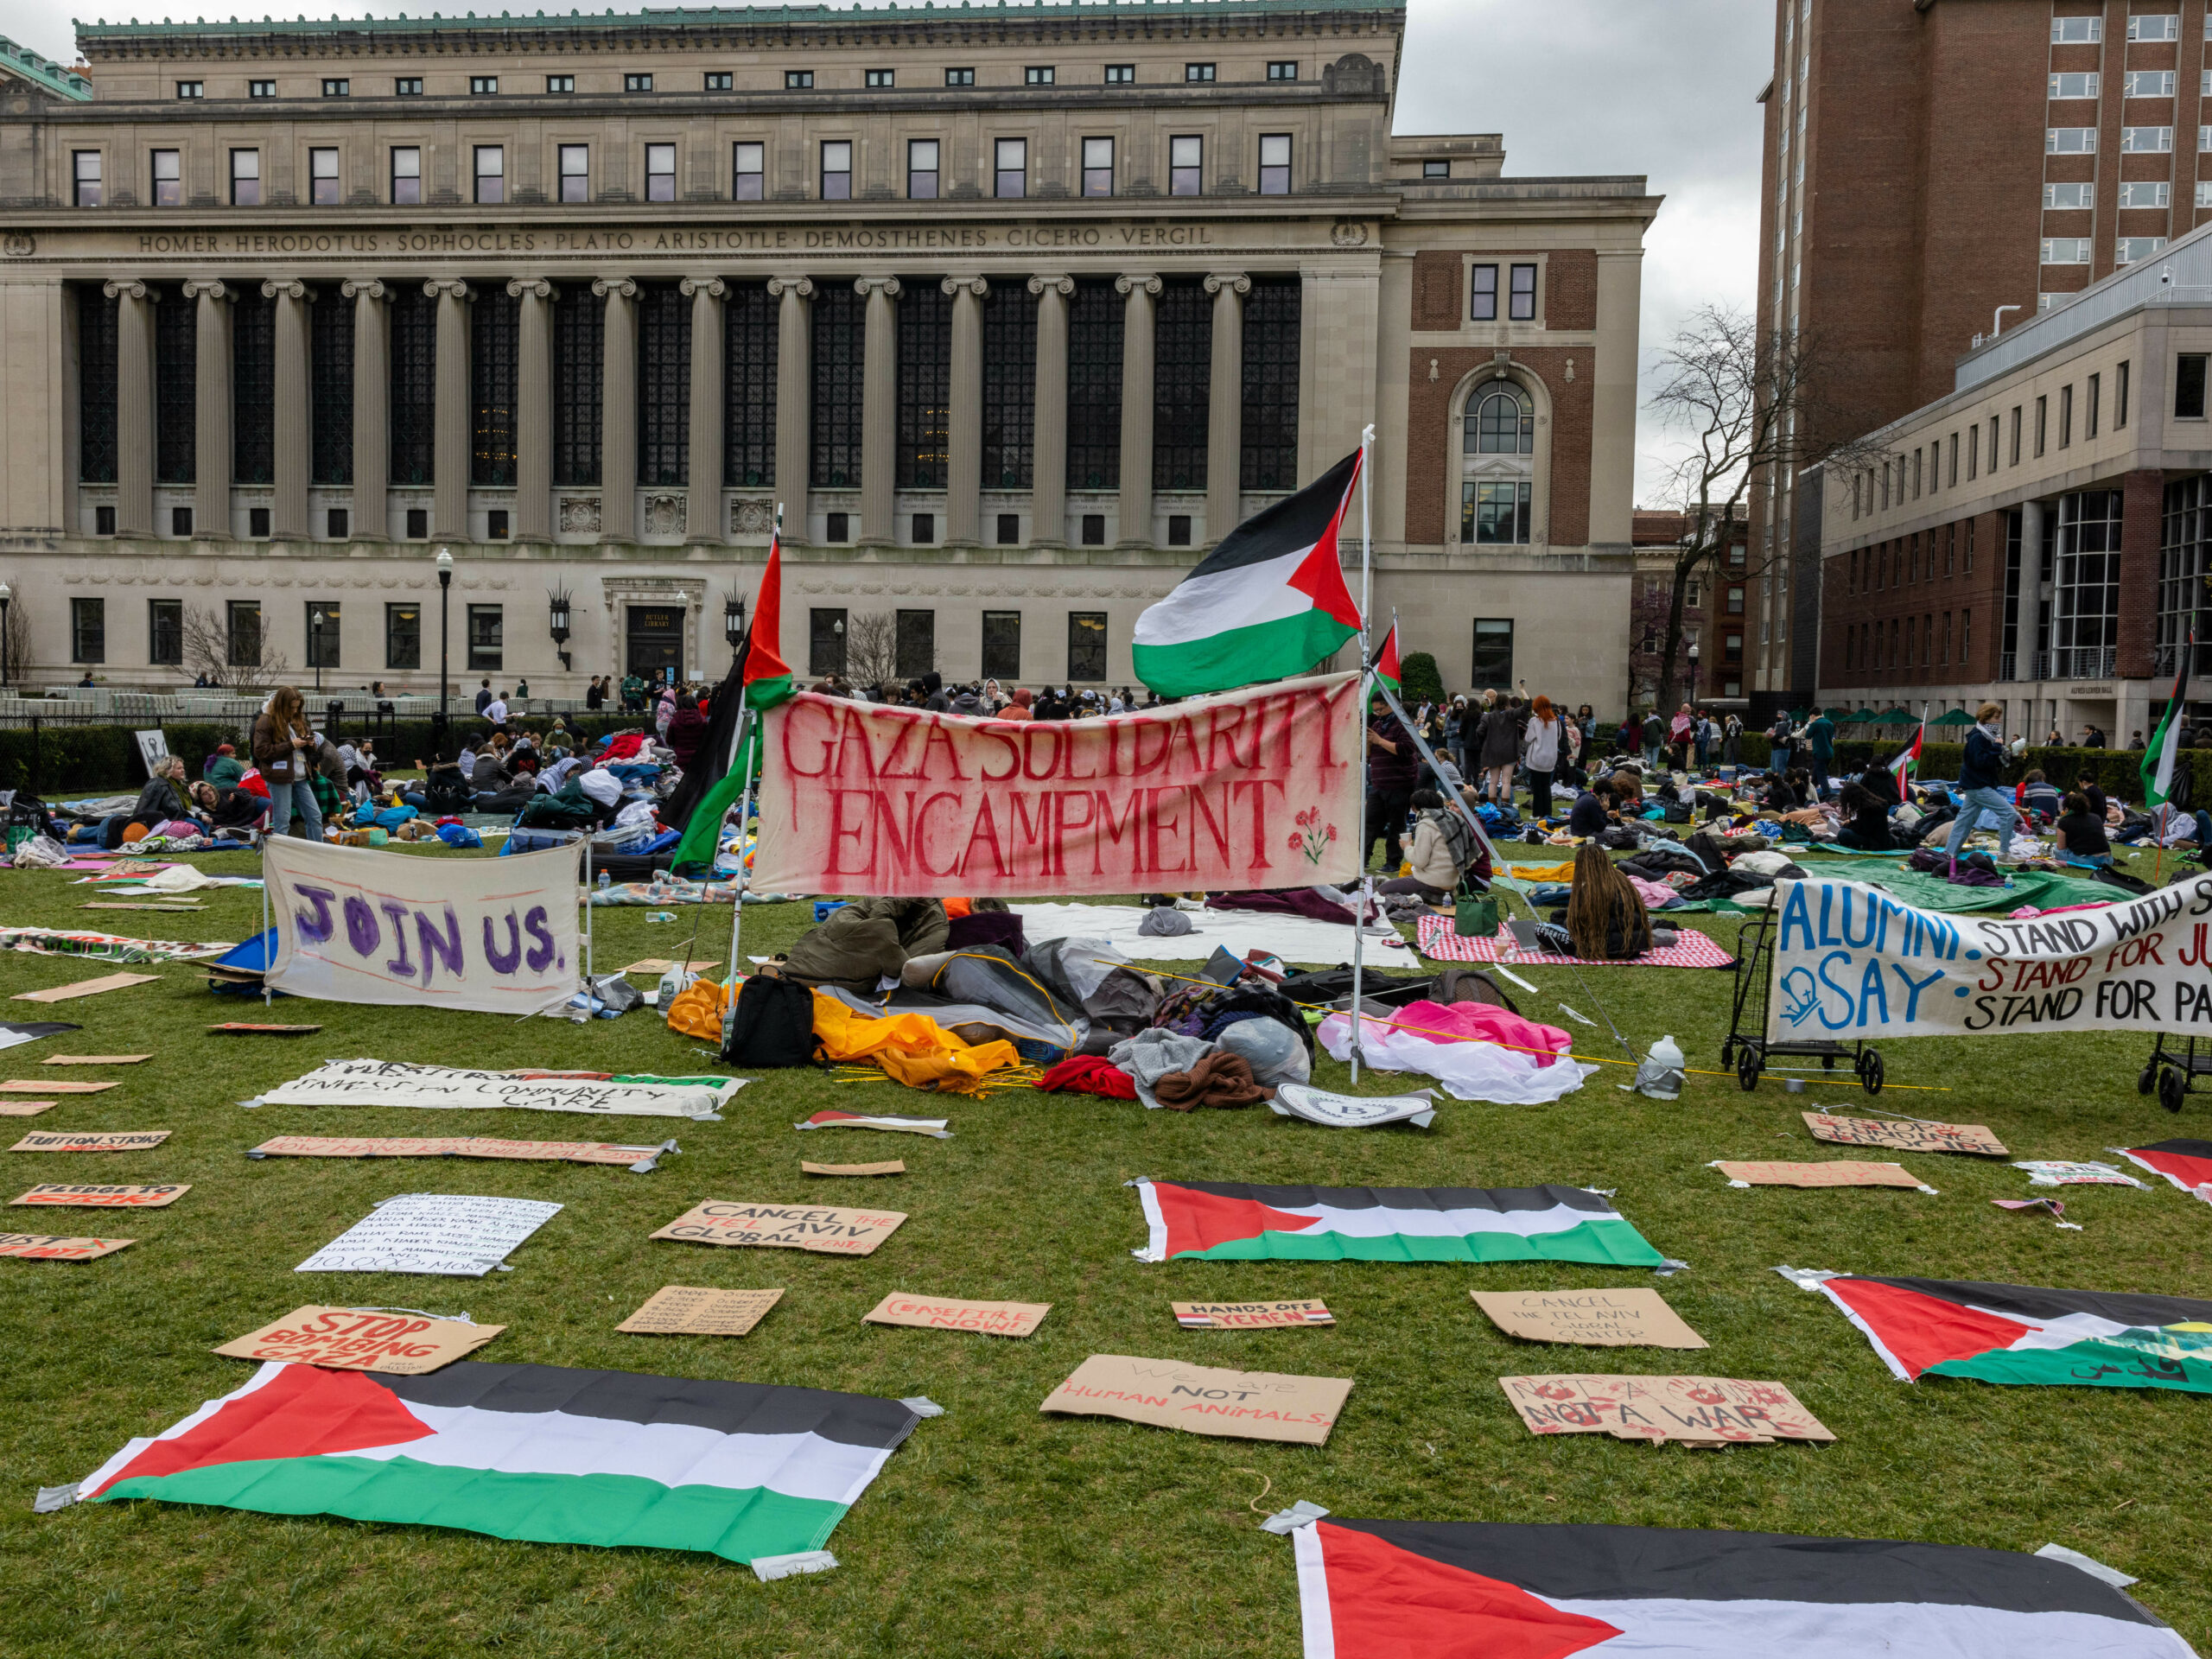 Columbia University shifts classes to remote-only after a wave of protests on campus